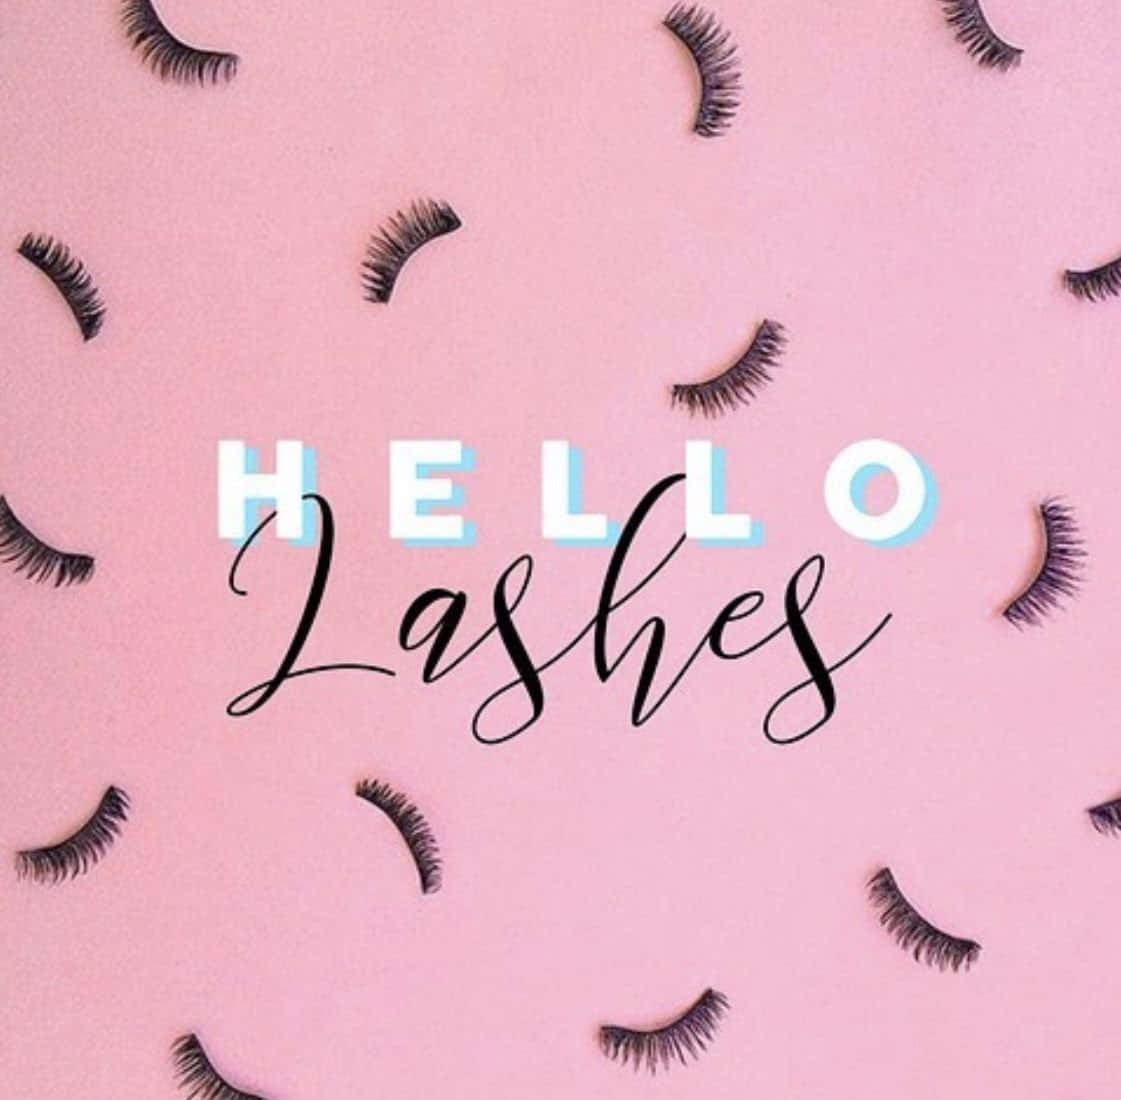 Hello Lashes - A Pink Background With Black Lashes